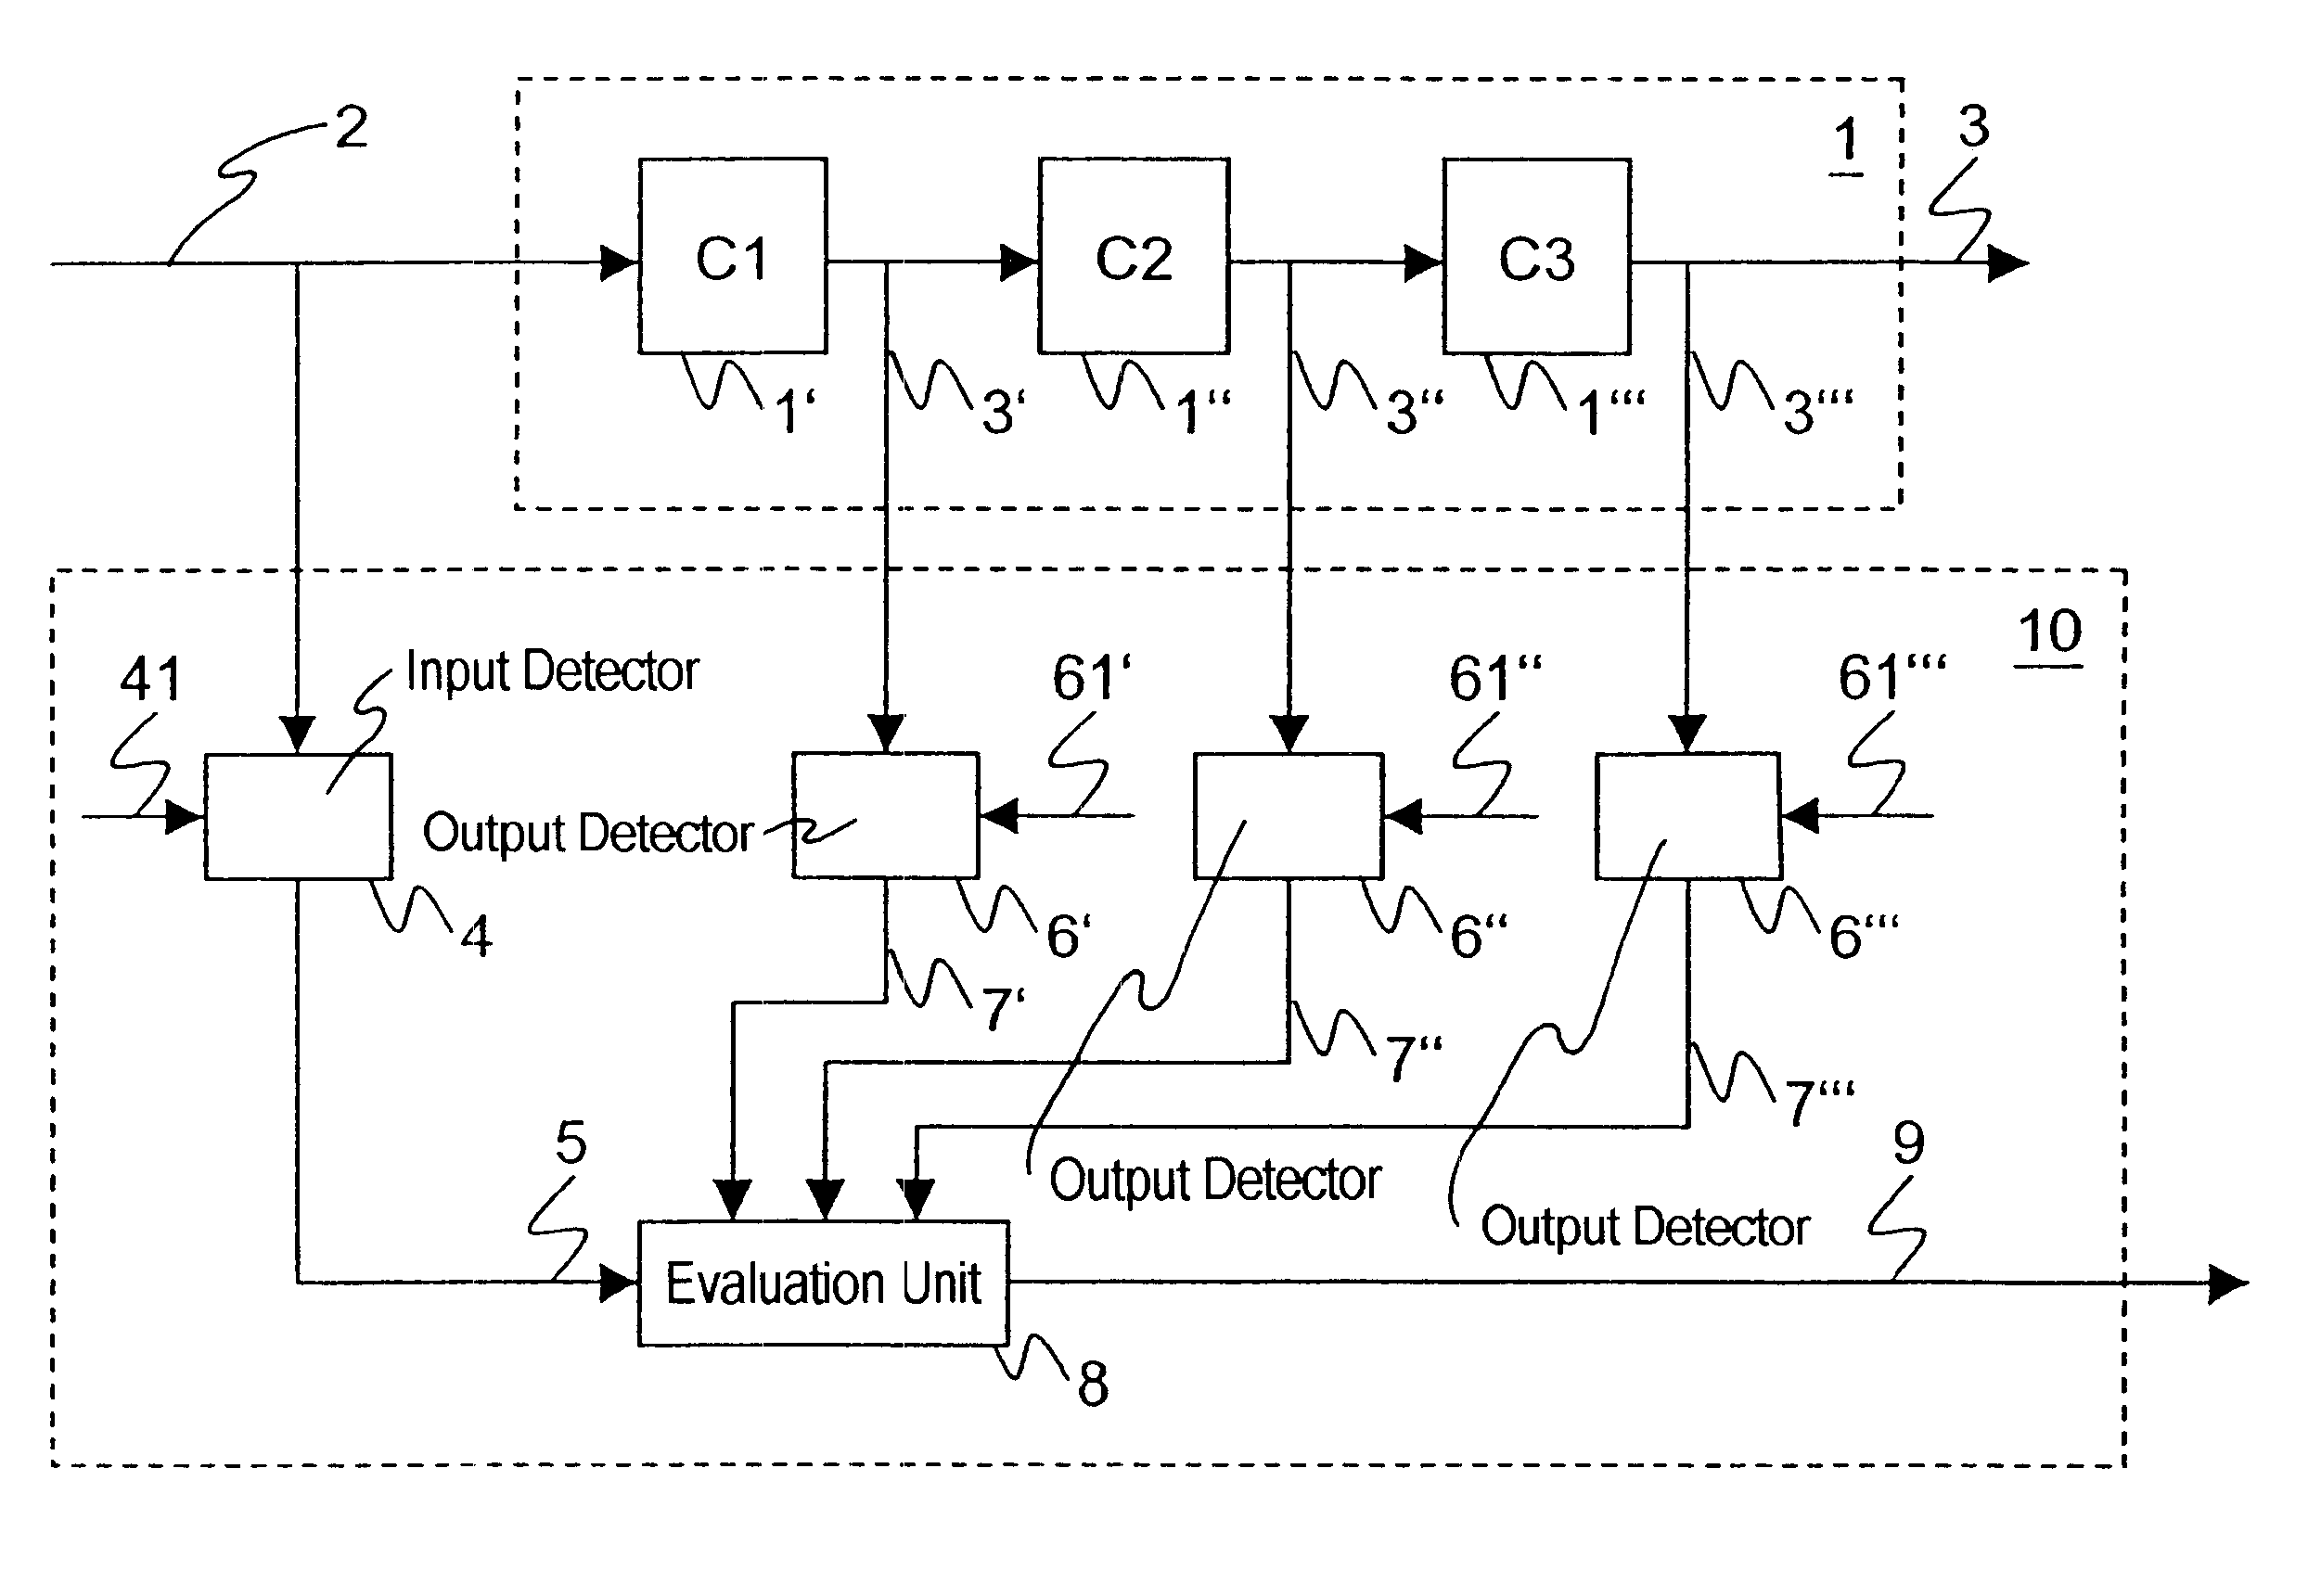 Operational monitoring for a converter